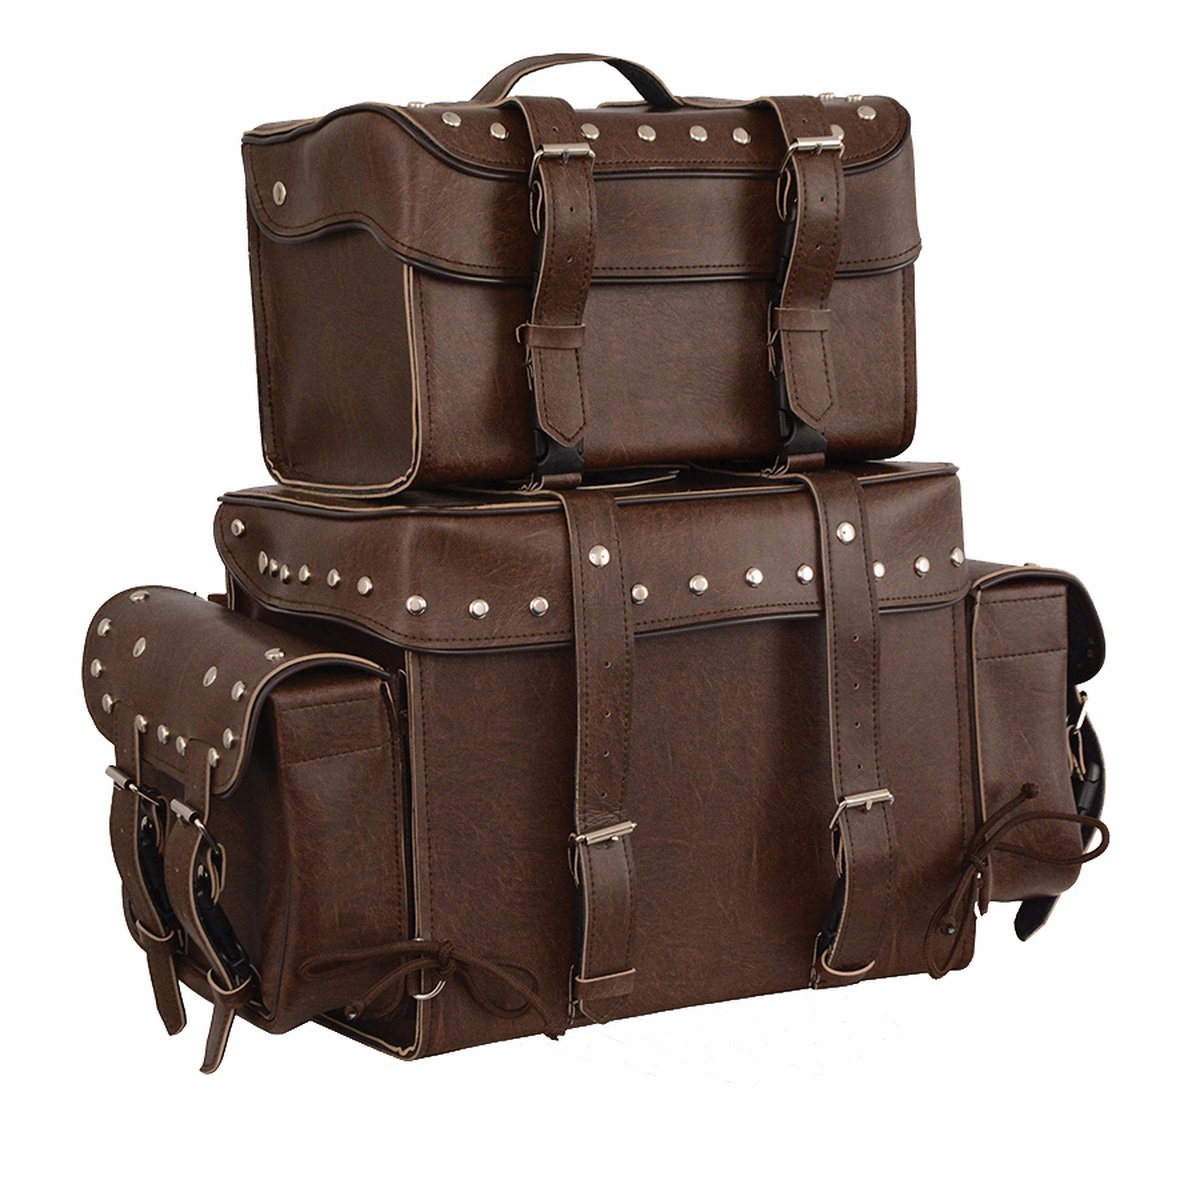 Milwaukee Performance MP8127RT Large Retro Brown Four Piece Studded PVC Touring Pack